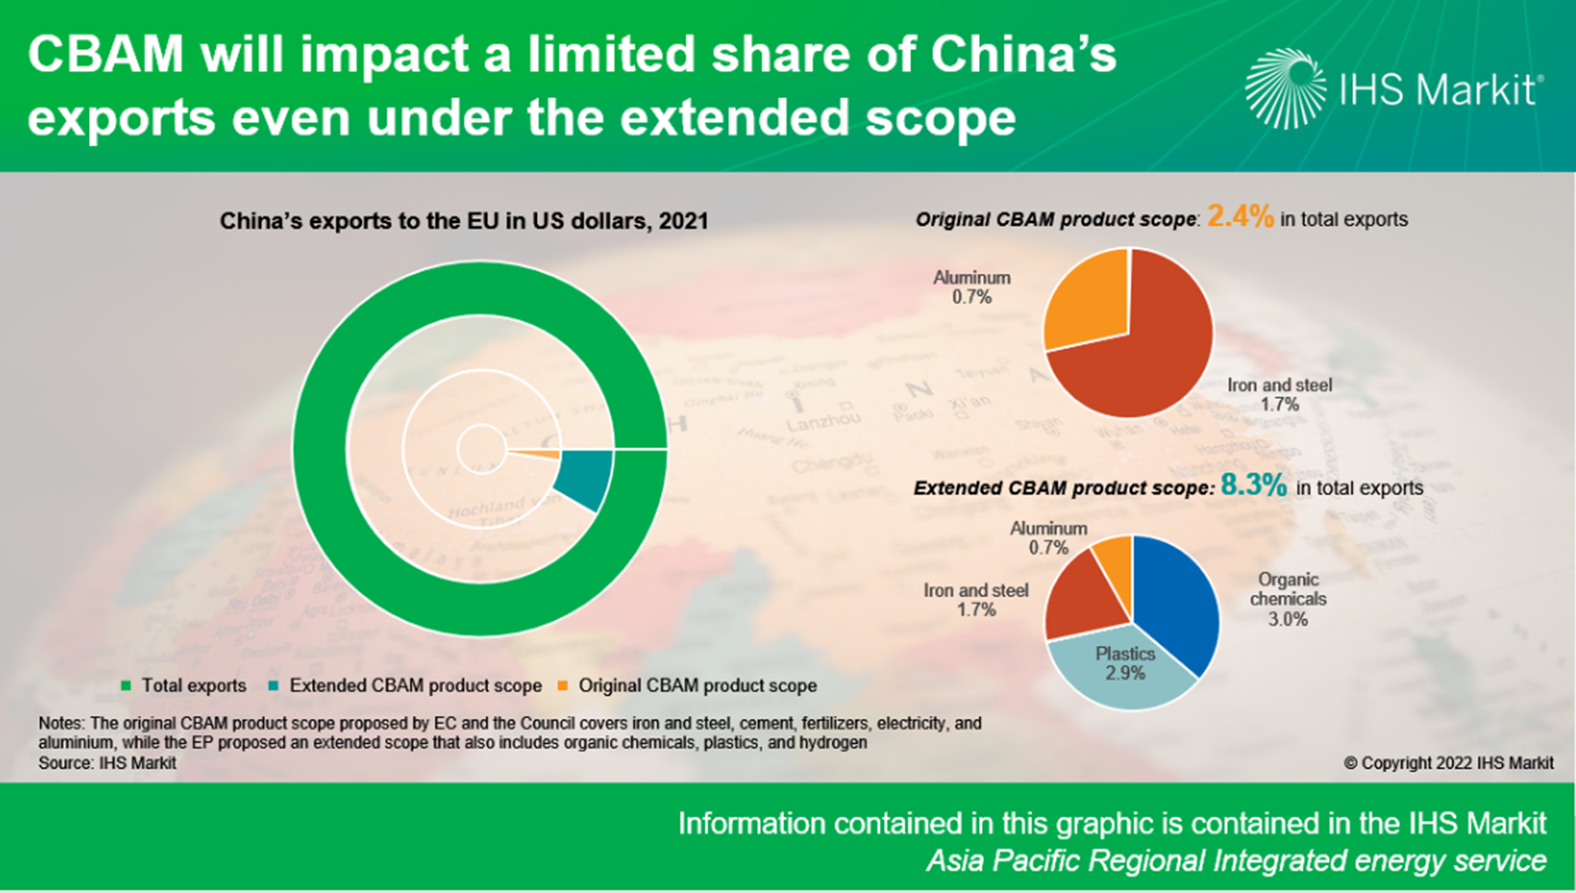 CBAM will impact a limited share of China's exports even under the extended scope